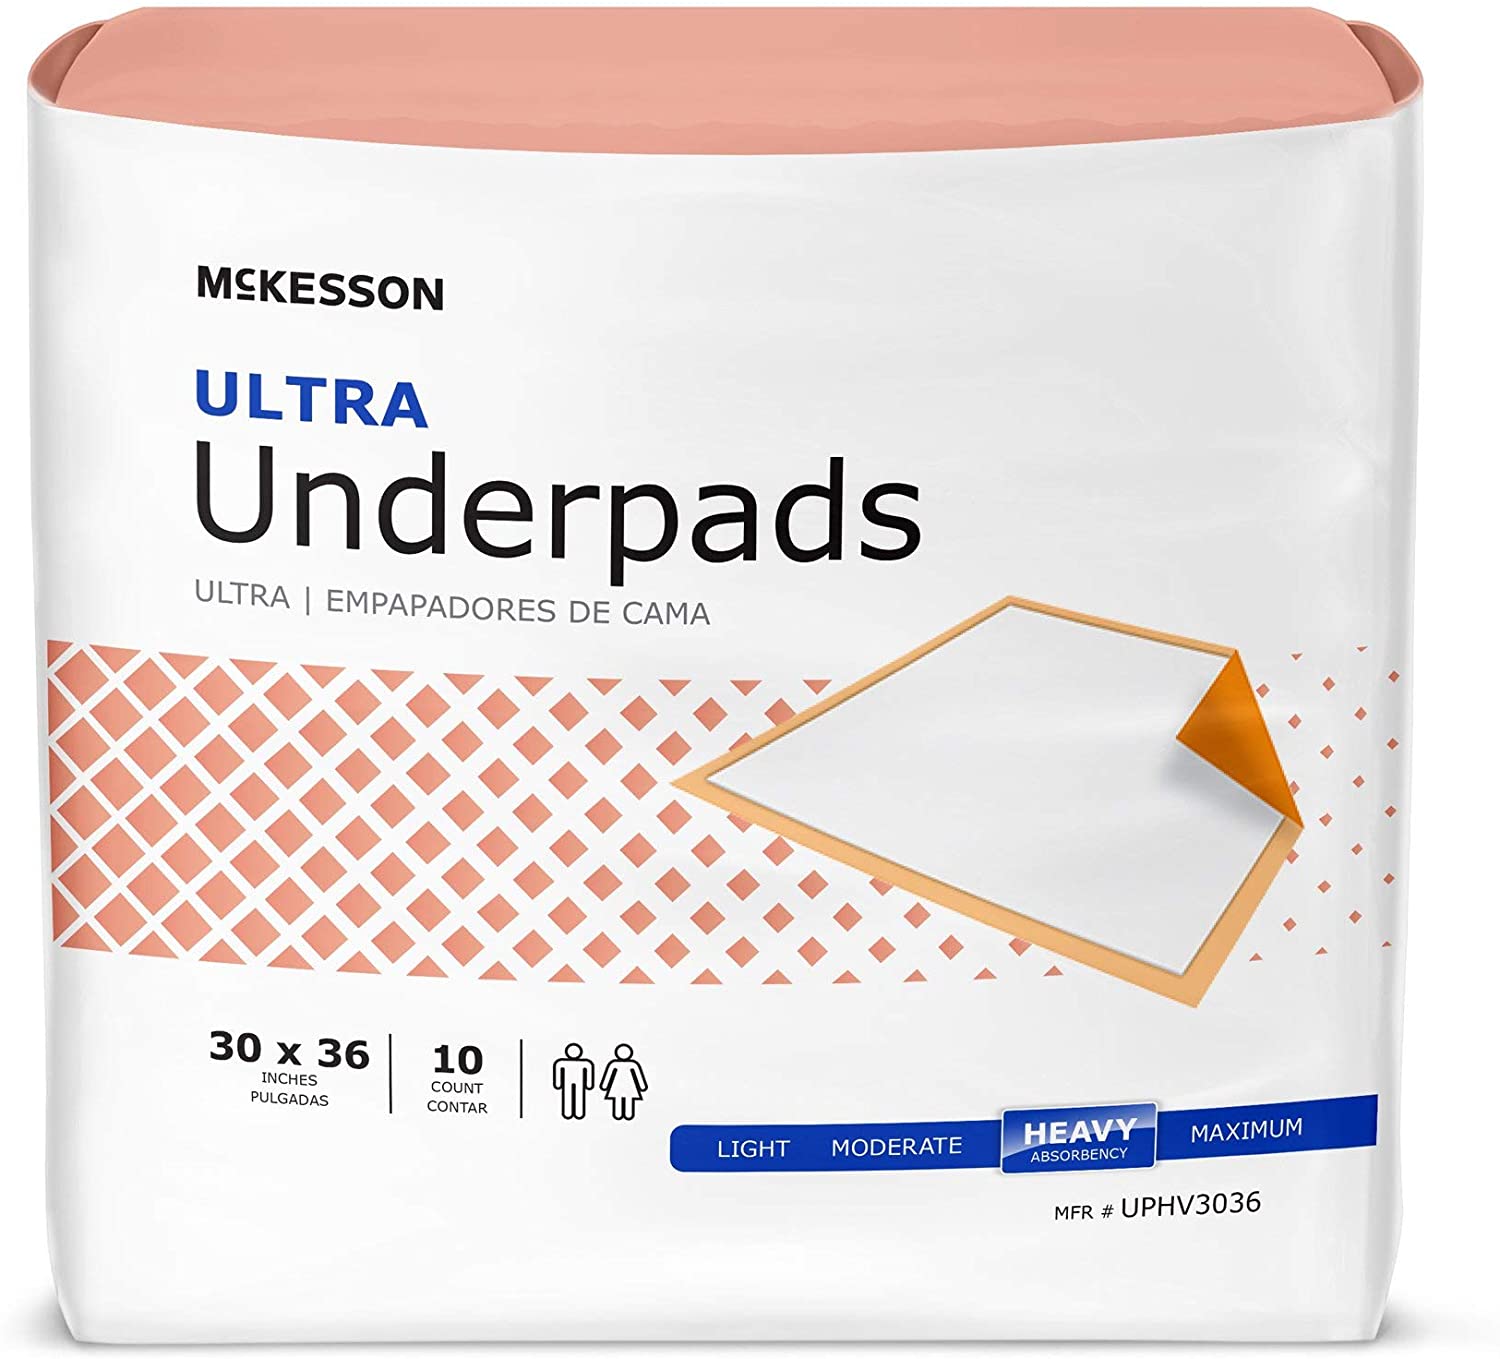 Mckesson Ultra Underpads - 100 Count-1